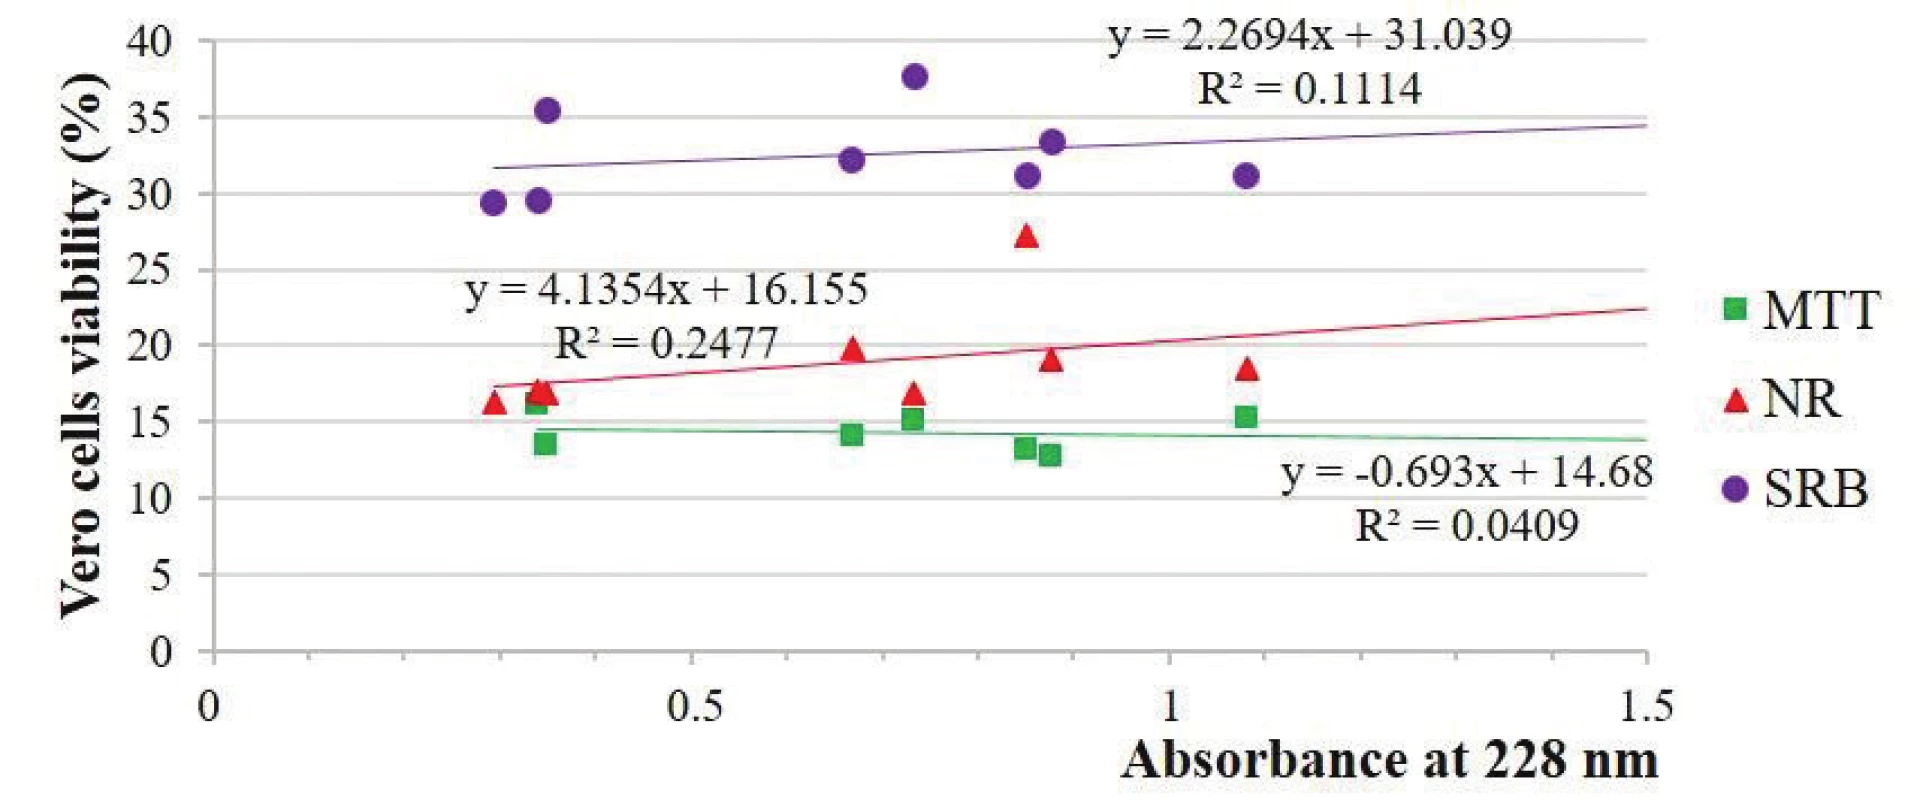 Estimation of Vero cells viability depending on the absorbance solutions at 228 nm